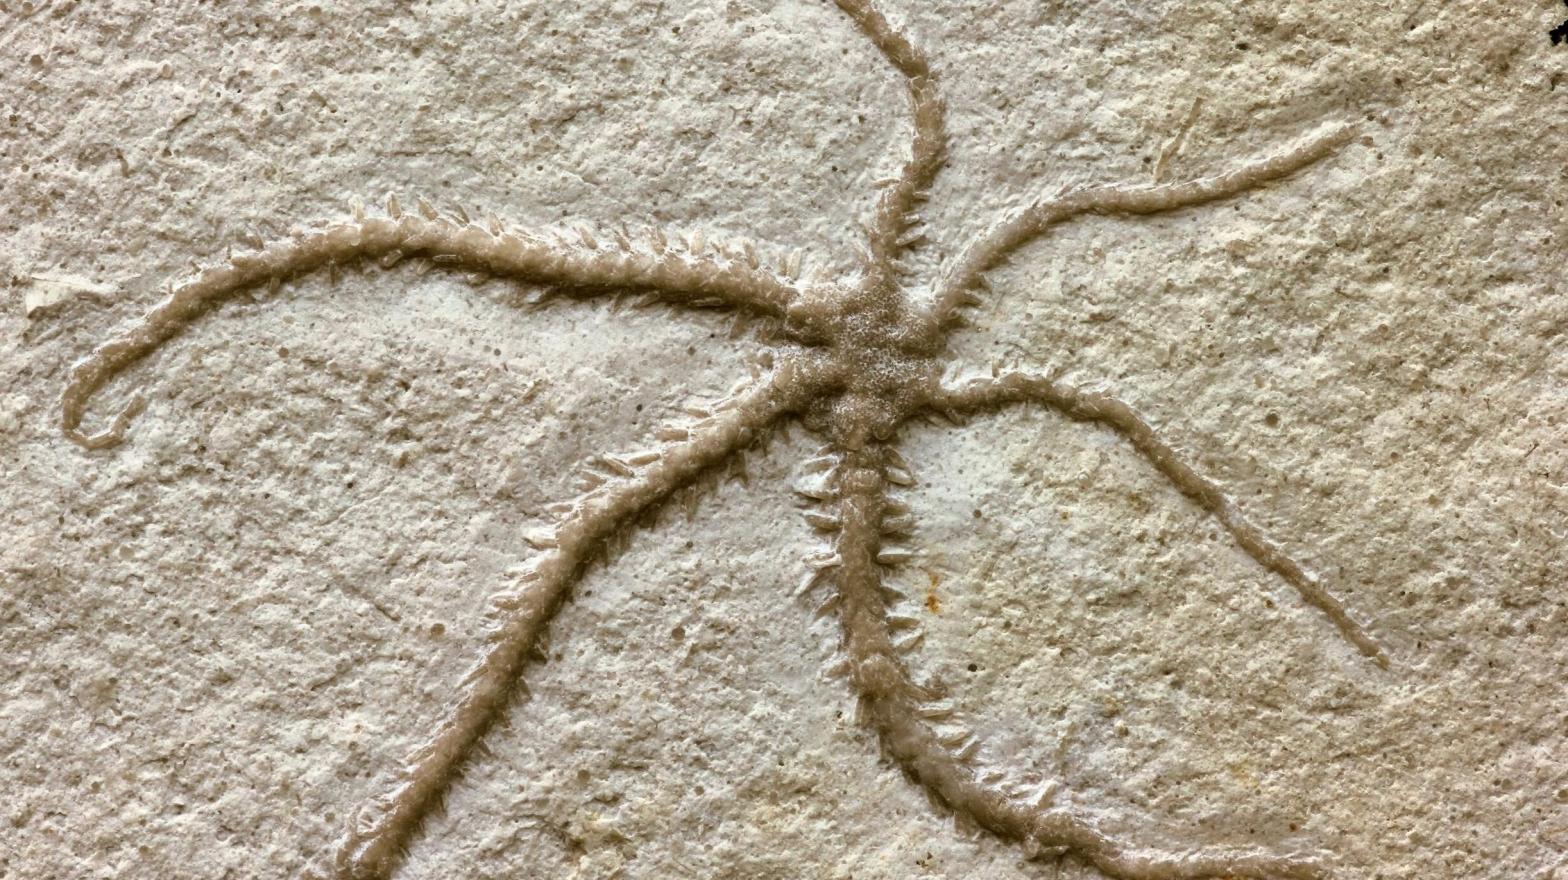 150-Million-Year-Old Brittle Star Fossilized in the Middle of Cloning Itself